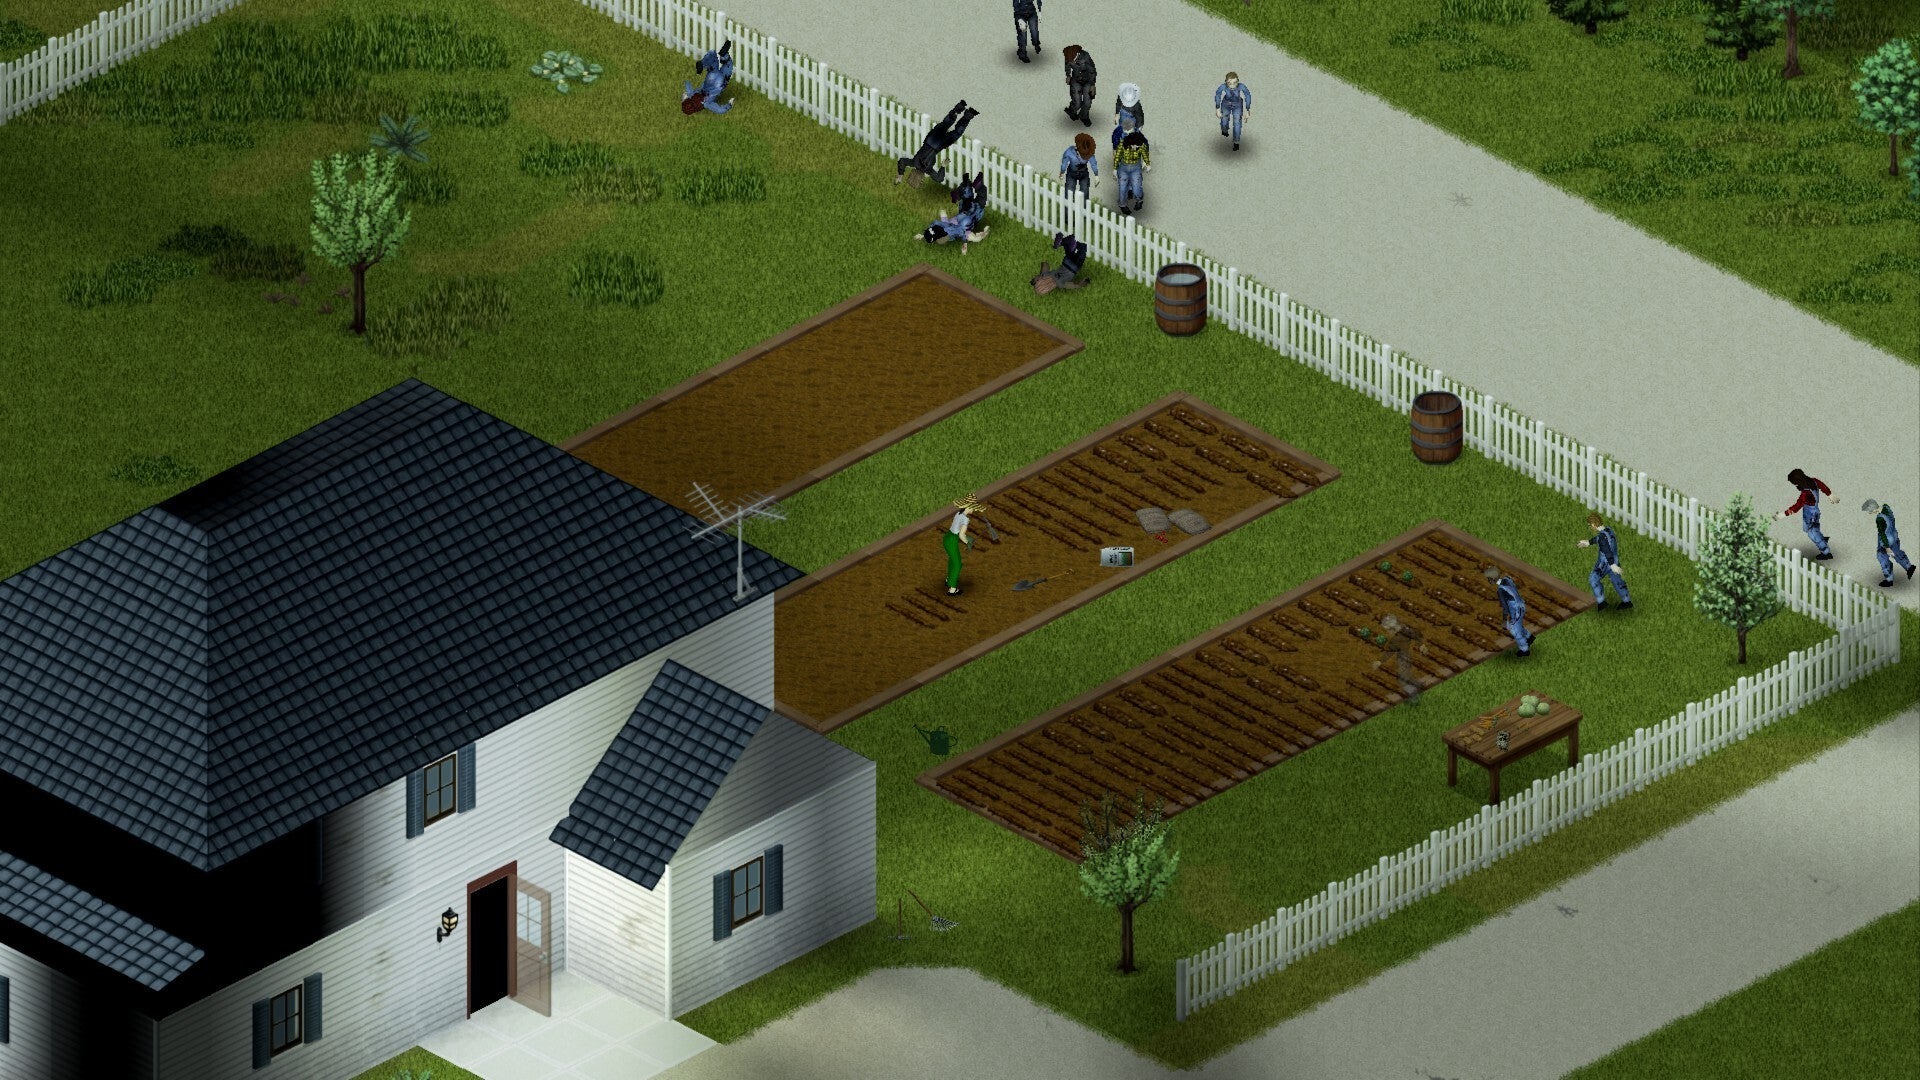 Project Zomboid player farming at a base with zombies spilling over the fence. Horde is attacking from the road